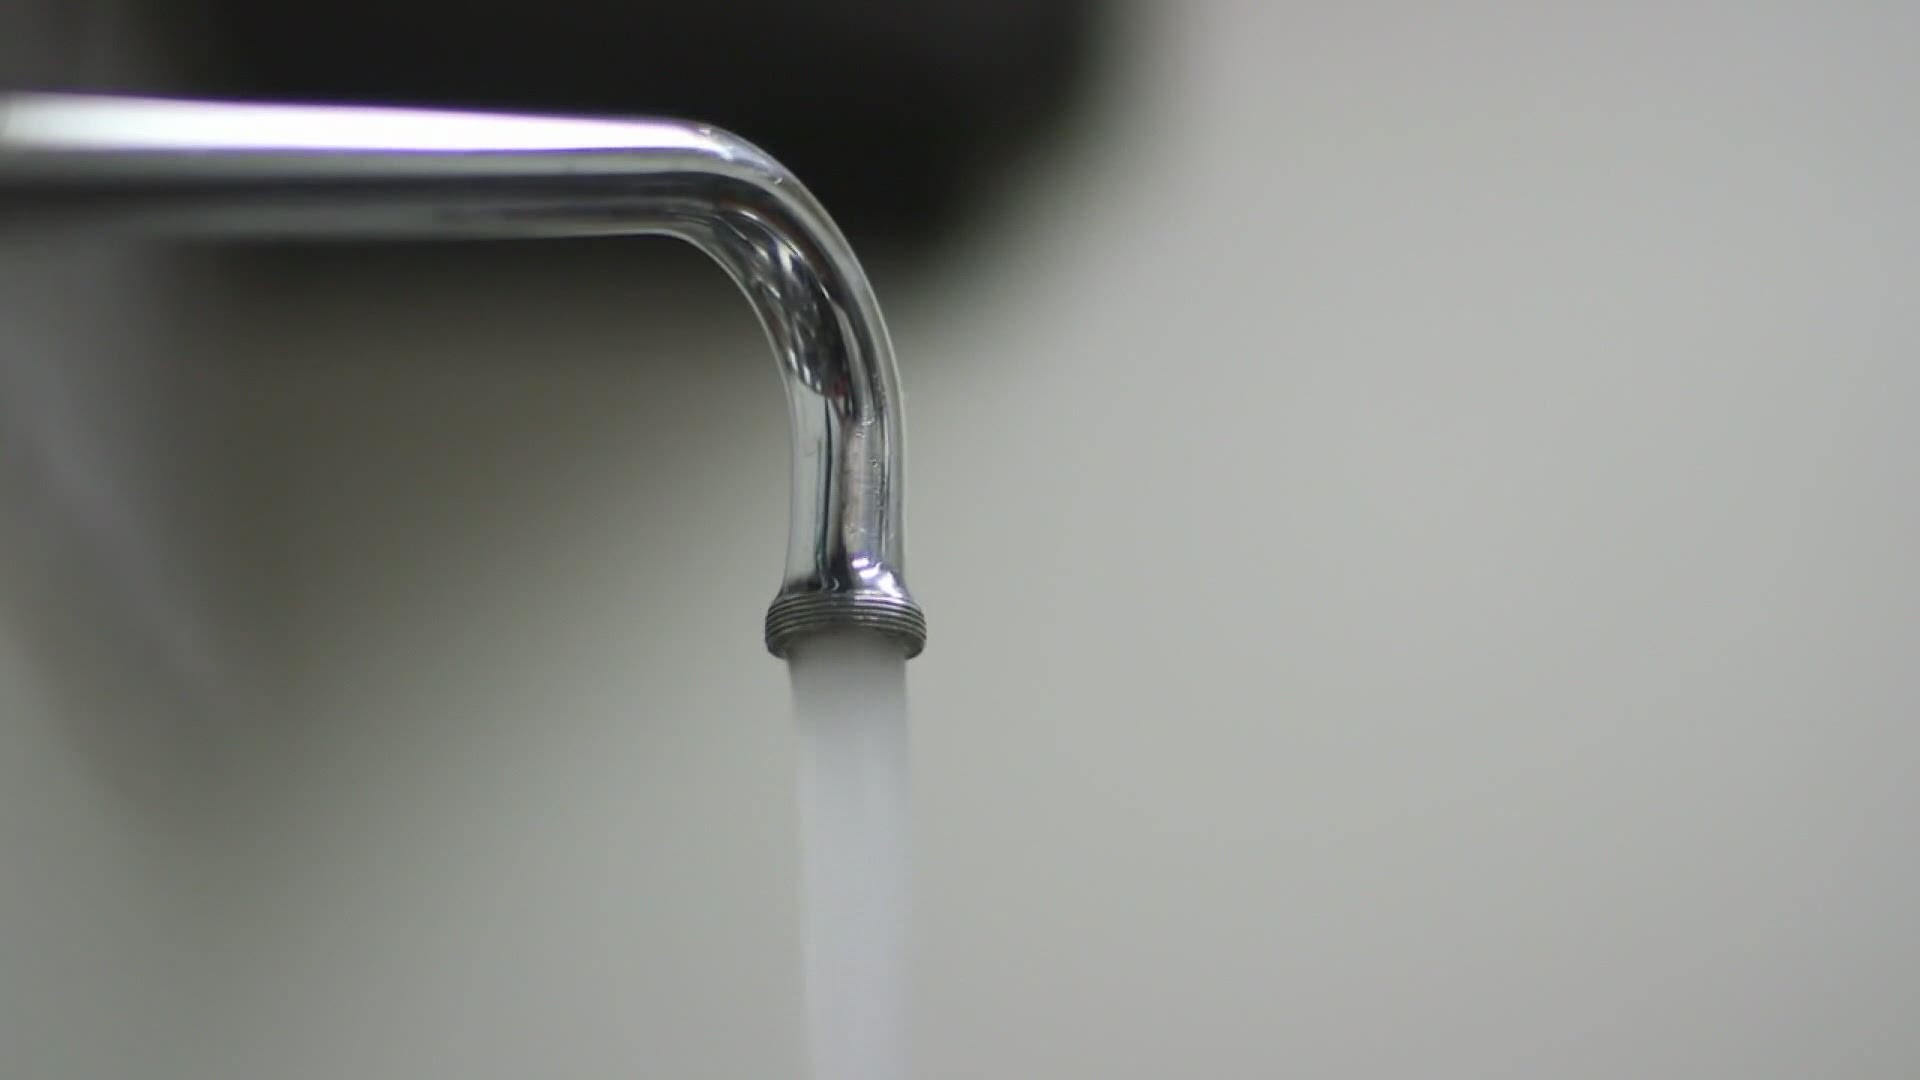 The State of Michigan will pay a $600 Million settlement to those whose health was damaged by the lead tainted water.